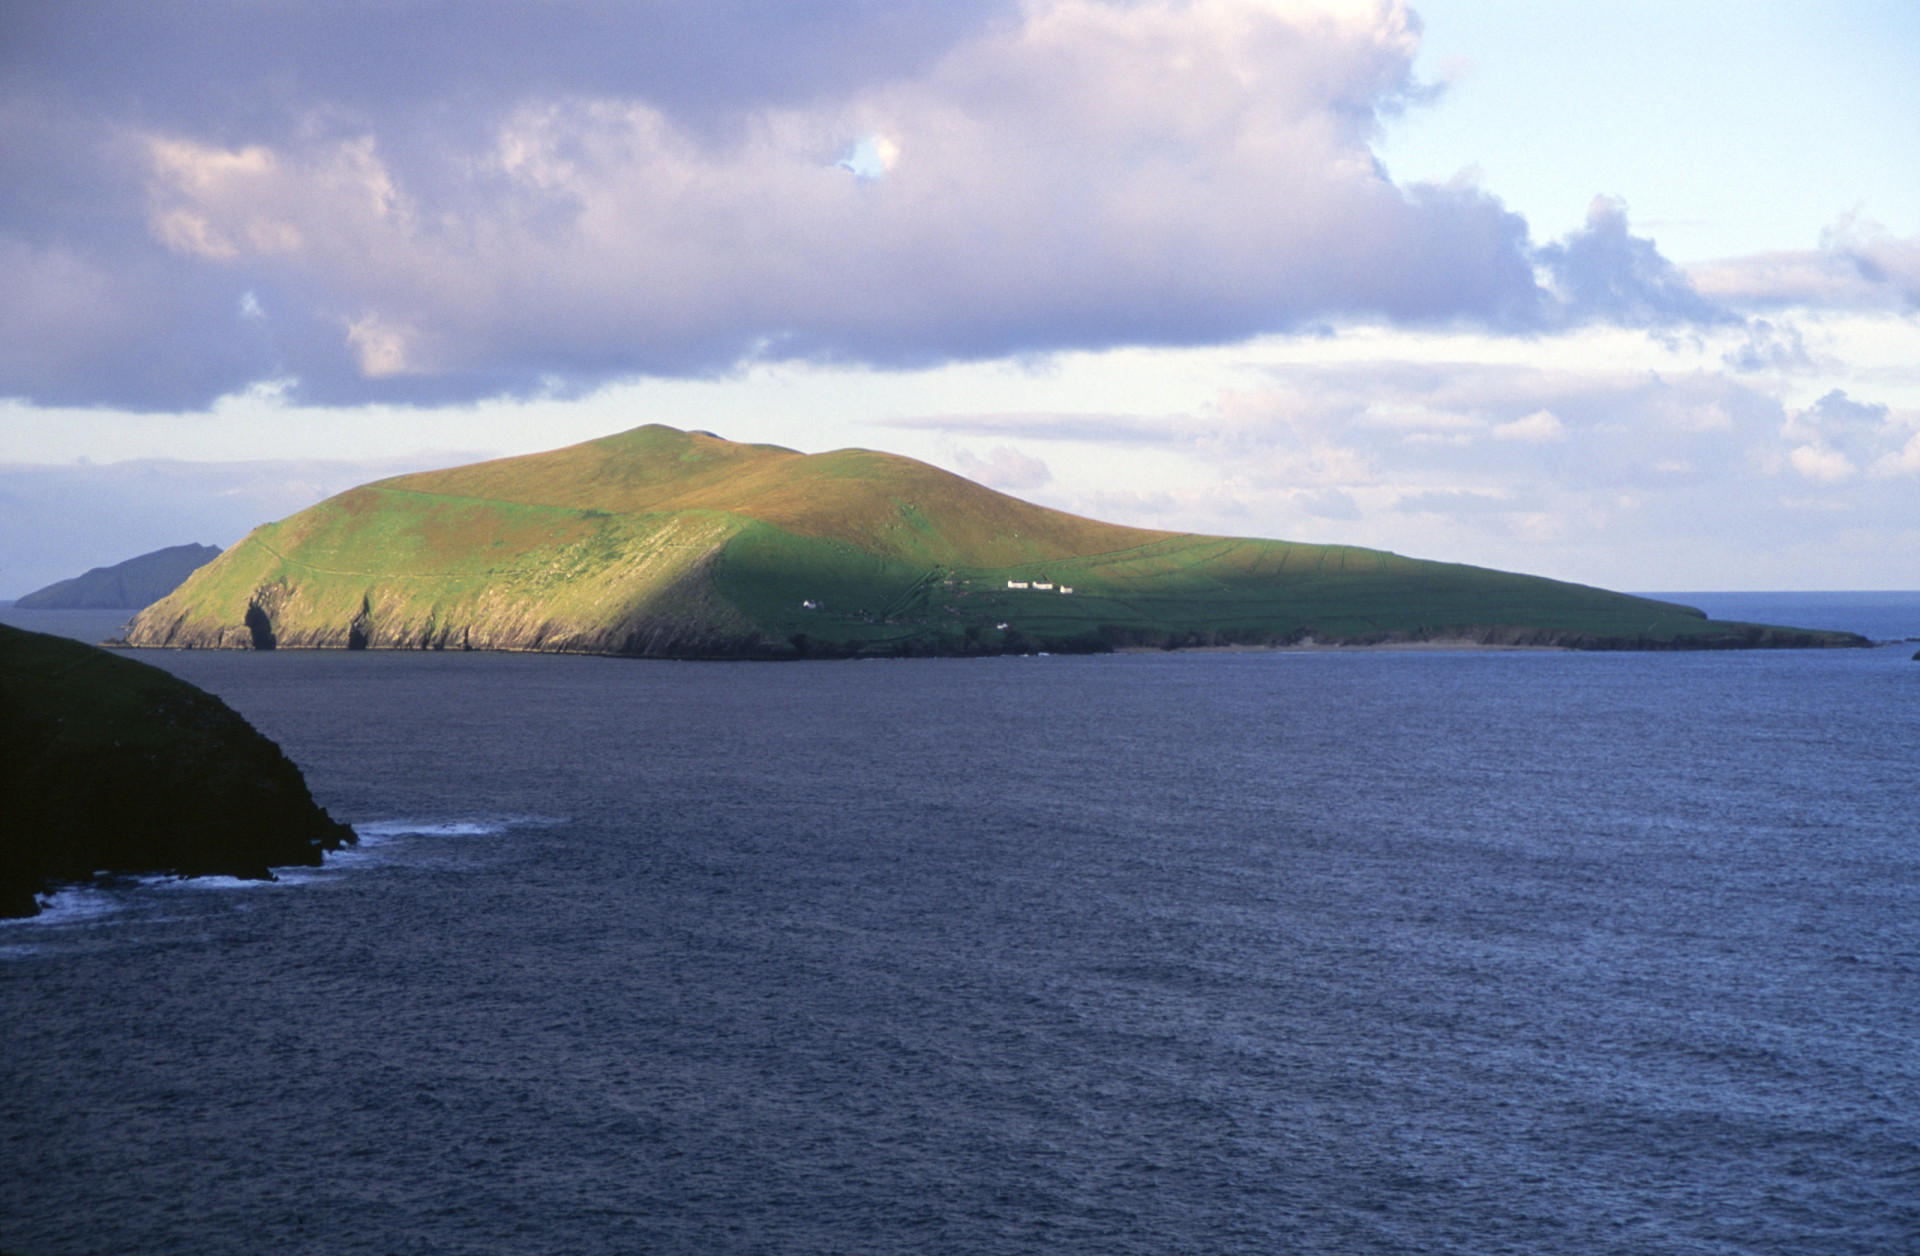 <p>These remote islands off the Dingle Peninsula in Co. Kerry boast 1,100 acres of unspoiled, mountainous terrain.</p><p>You may also like:<a href="https://www.starsinsider.com/n/265596?utm_source=msn.com&utm_medium=display&utm_campaign=referral_description&utm_content=621106en-au"> Terrifying monsters you wouldn't want to encounter</a></p>